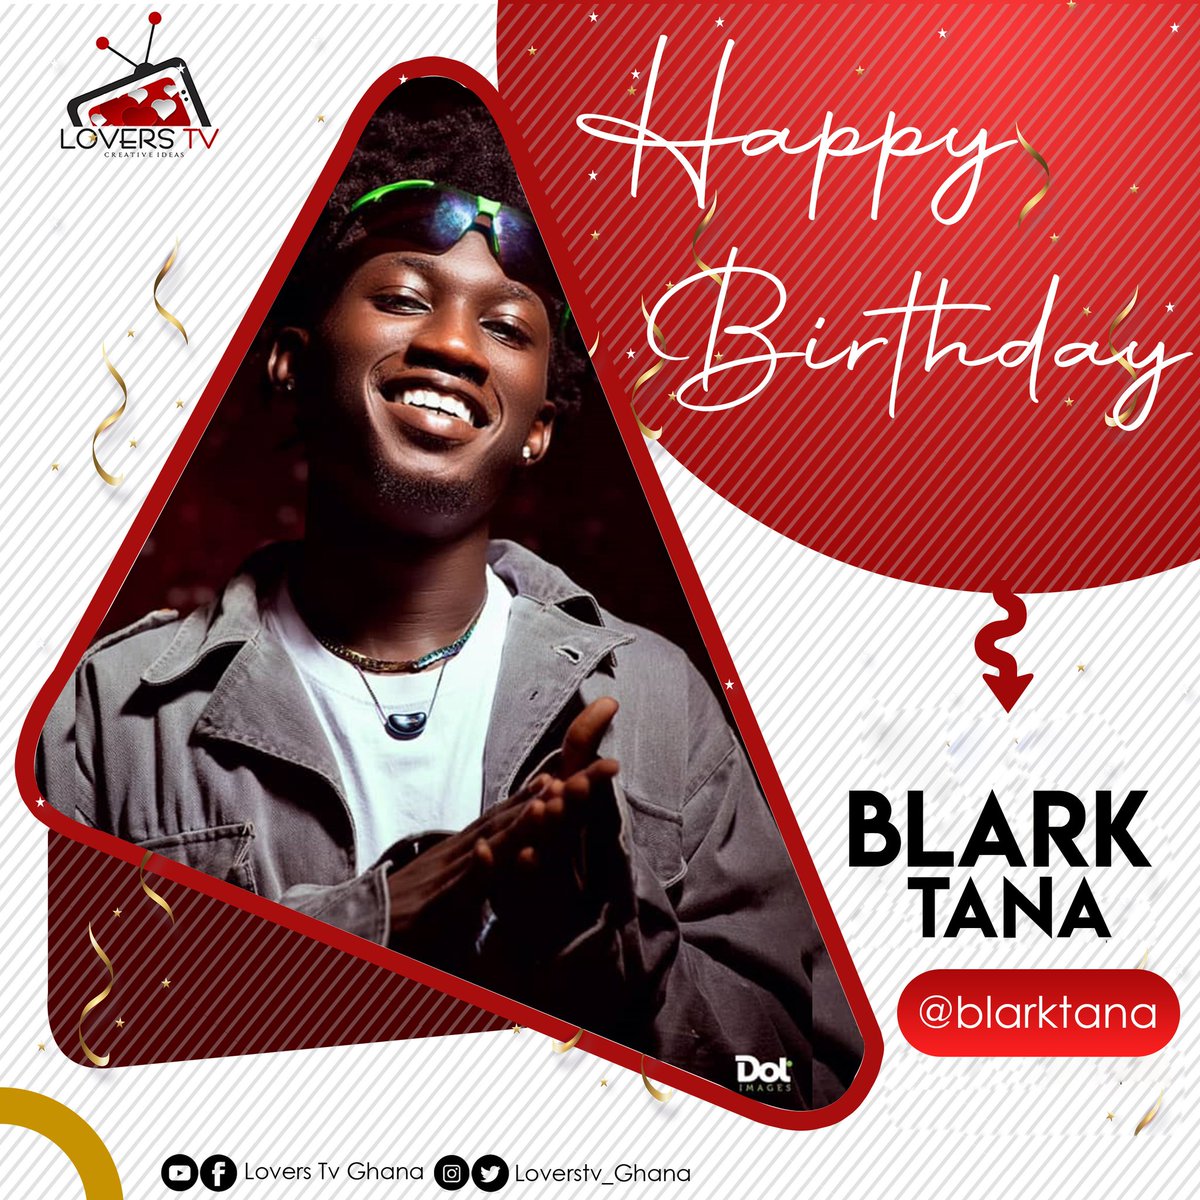 Happy birthday to our current winning best new artiste of the year @BlarkTana

More blessings and win in your music journey. 

Kindly Click on the link below to know more about him
 youtu.be/X4eMYxl8REw

#ltvbirthdays #loverstvghana #loverspromotions @OguaaDick @SmellnGoodSG2